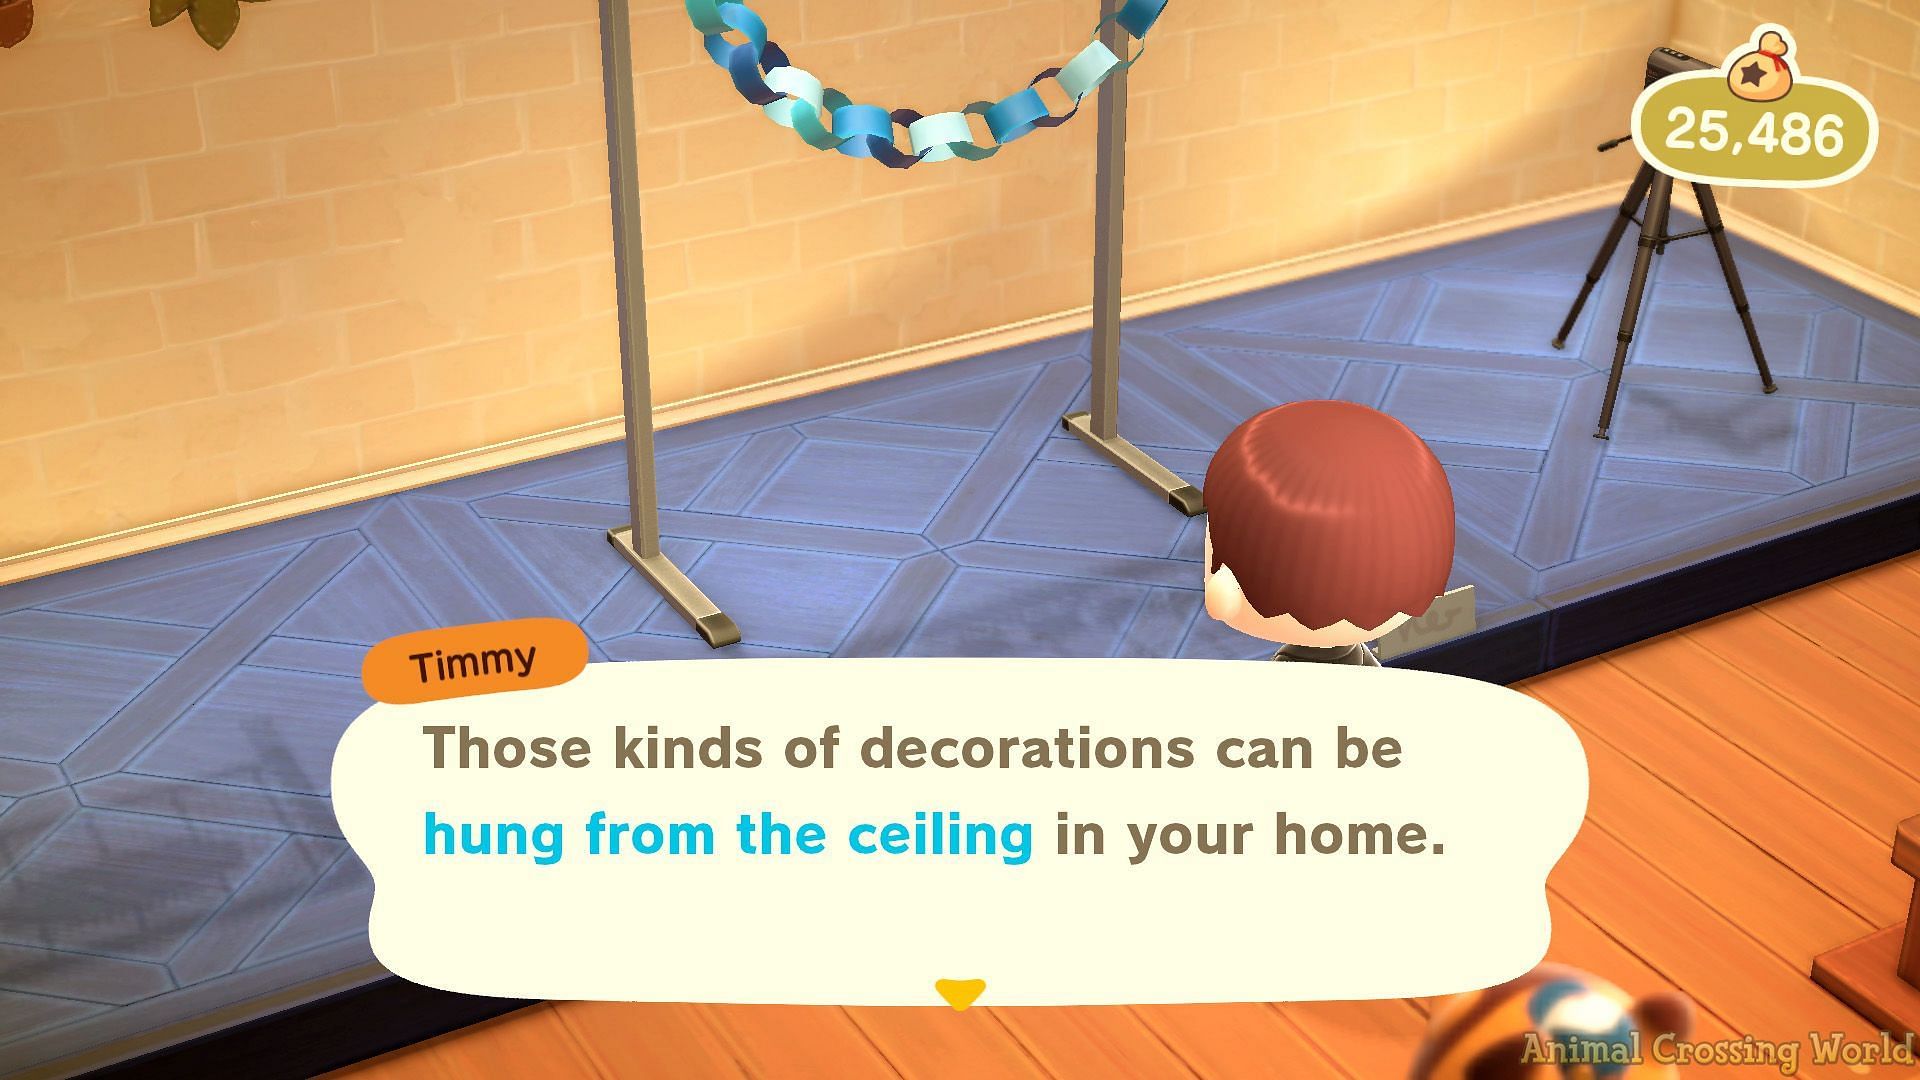 What is a Pro Decorating License in Animal Crossing: New Horizons?